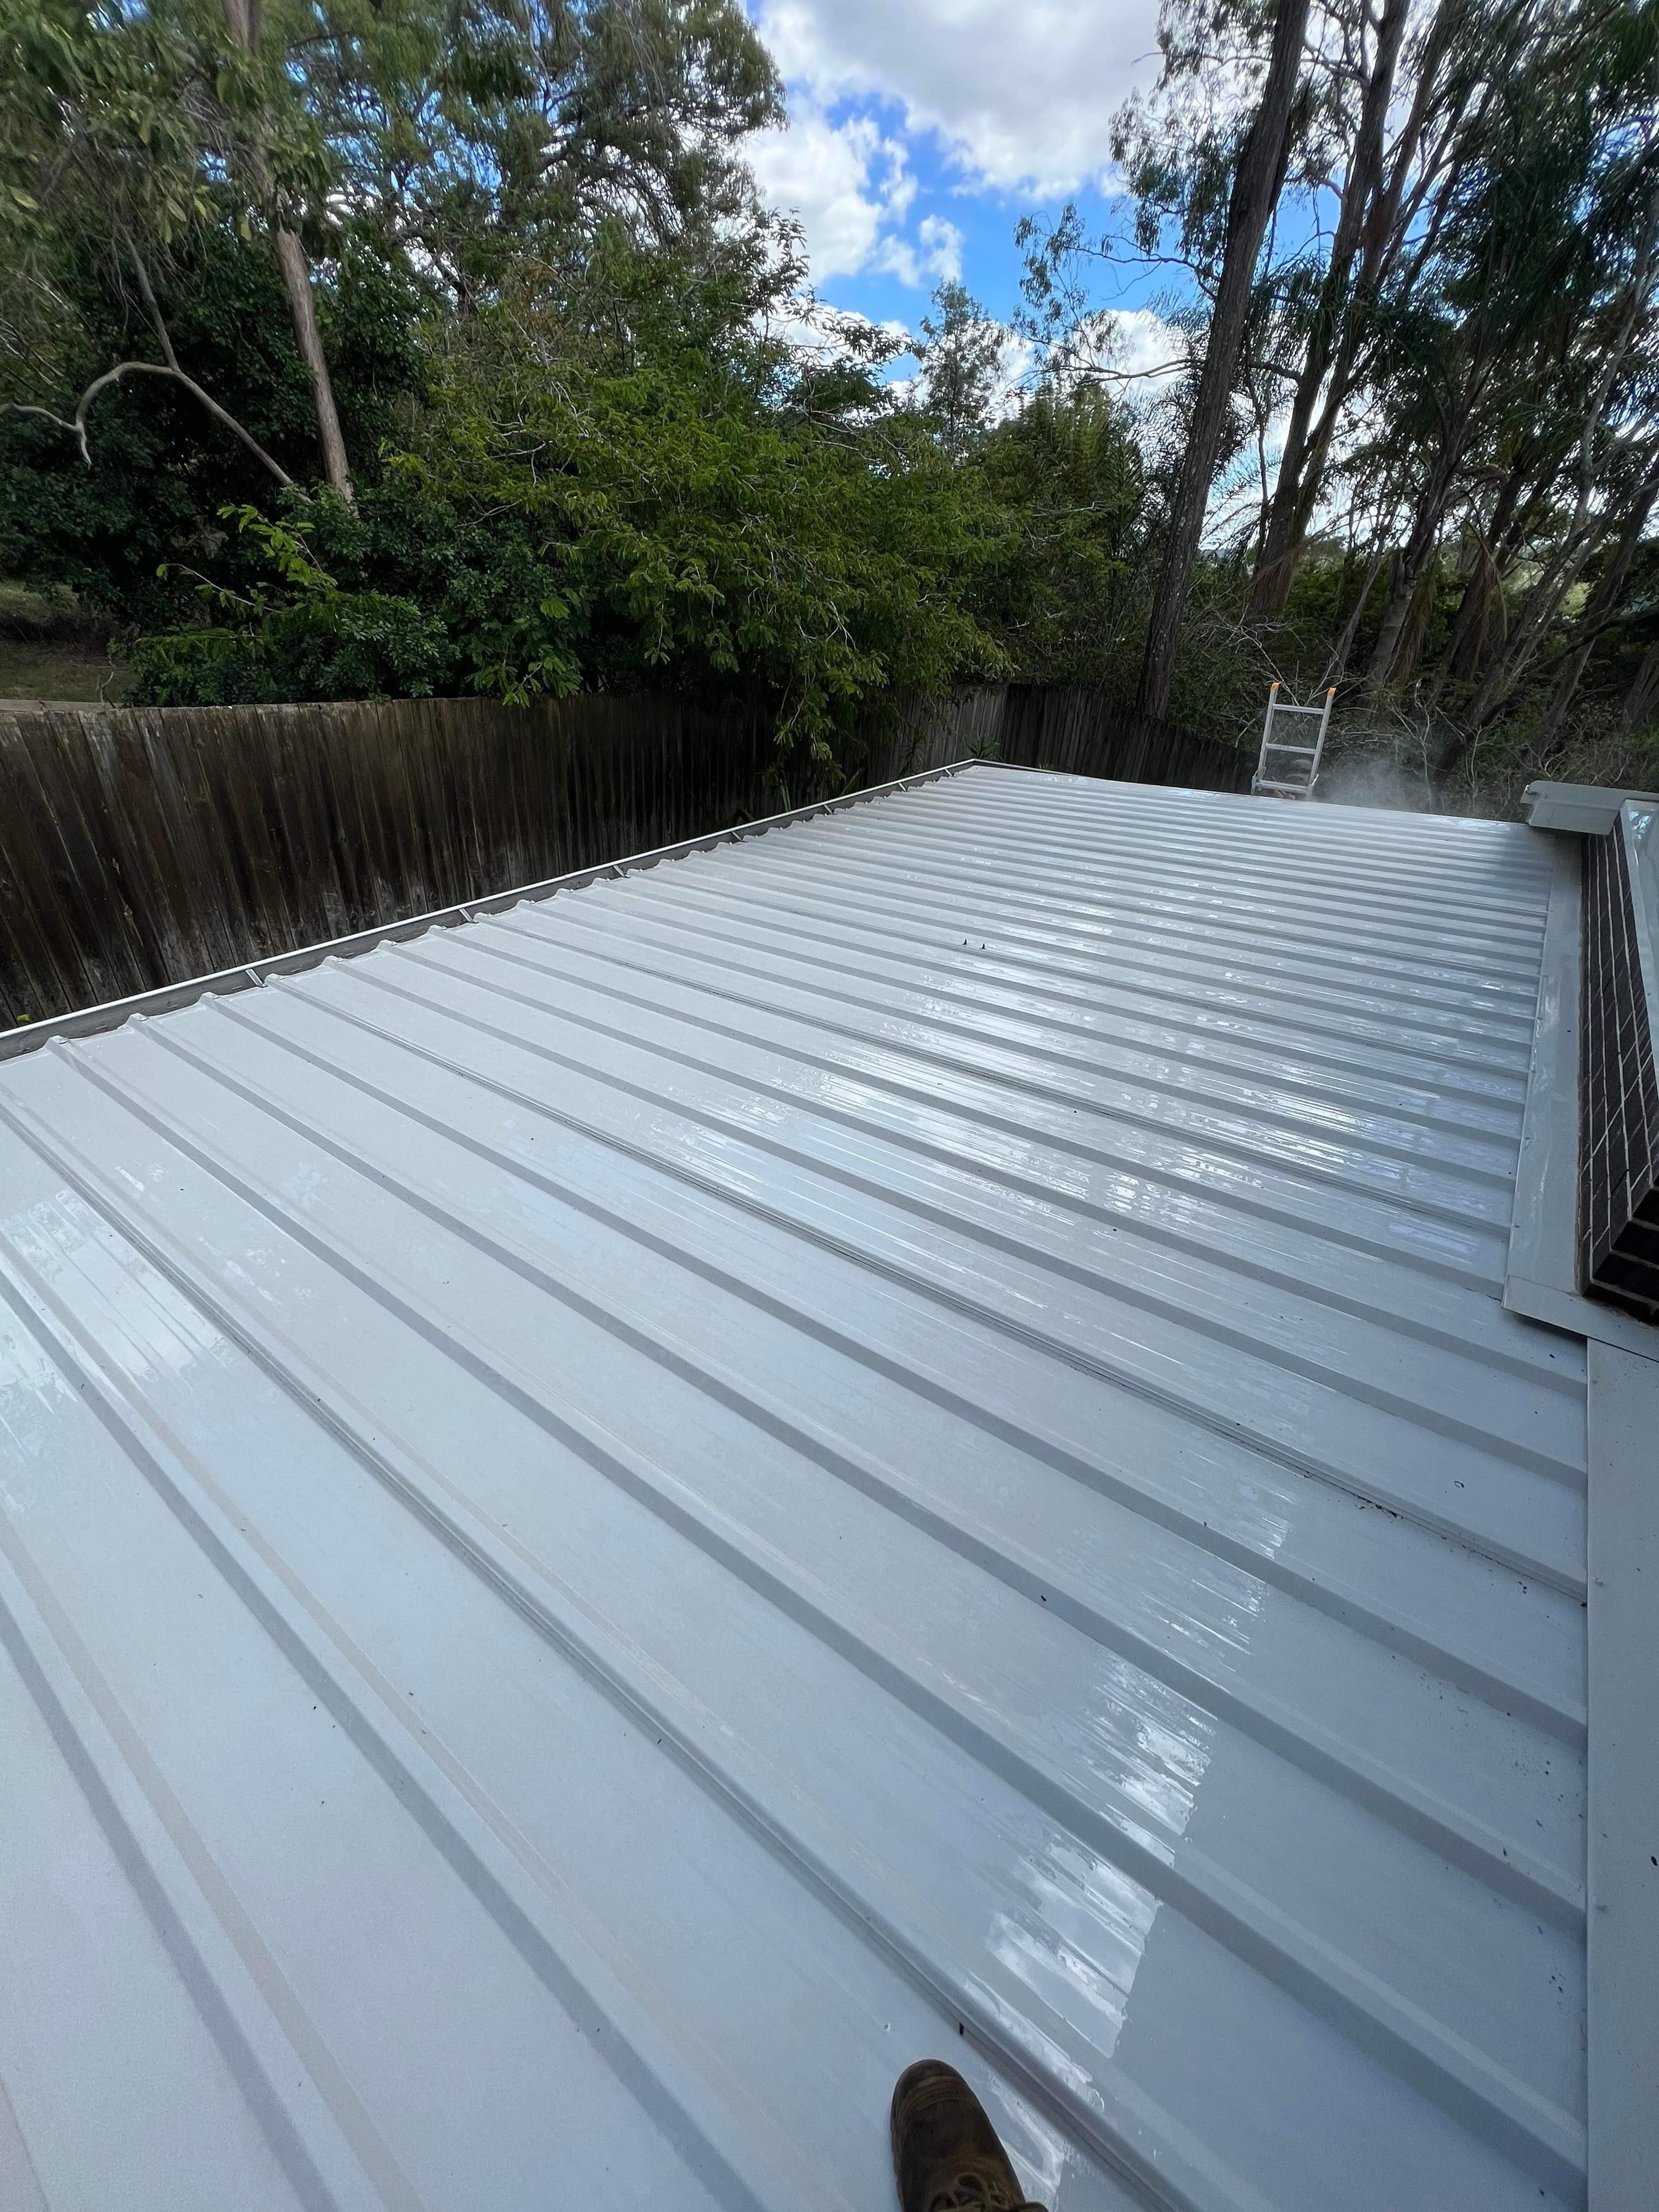 Roof, Eave and Gutter Cleaning in Shailer Park, Brisbane